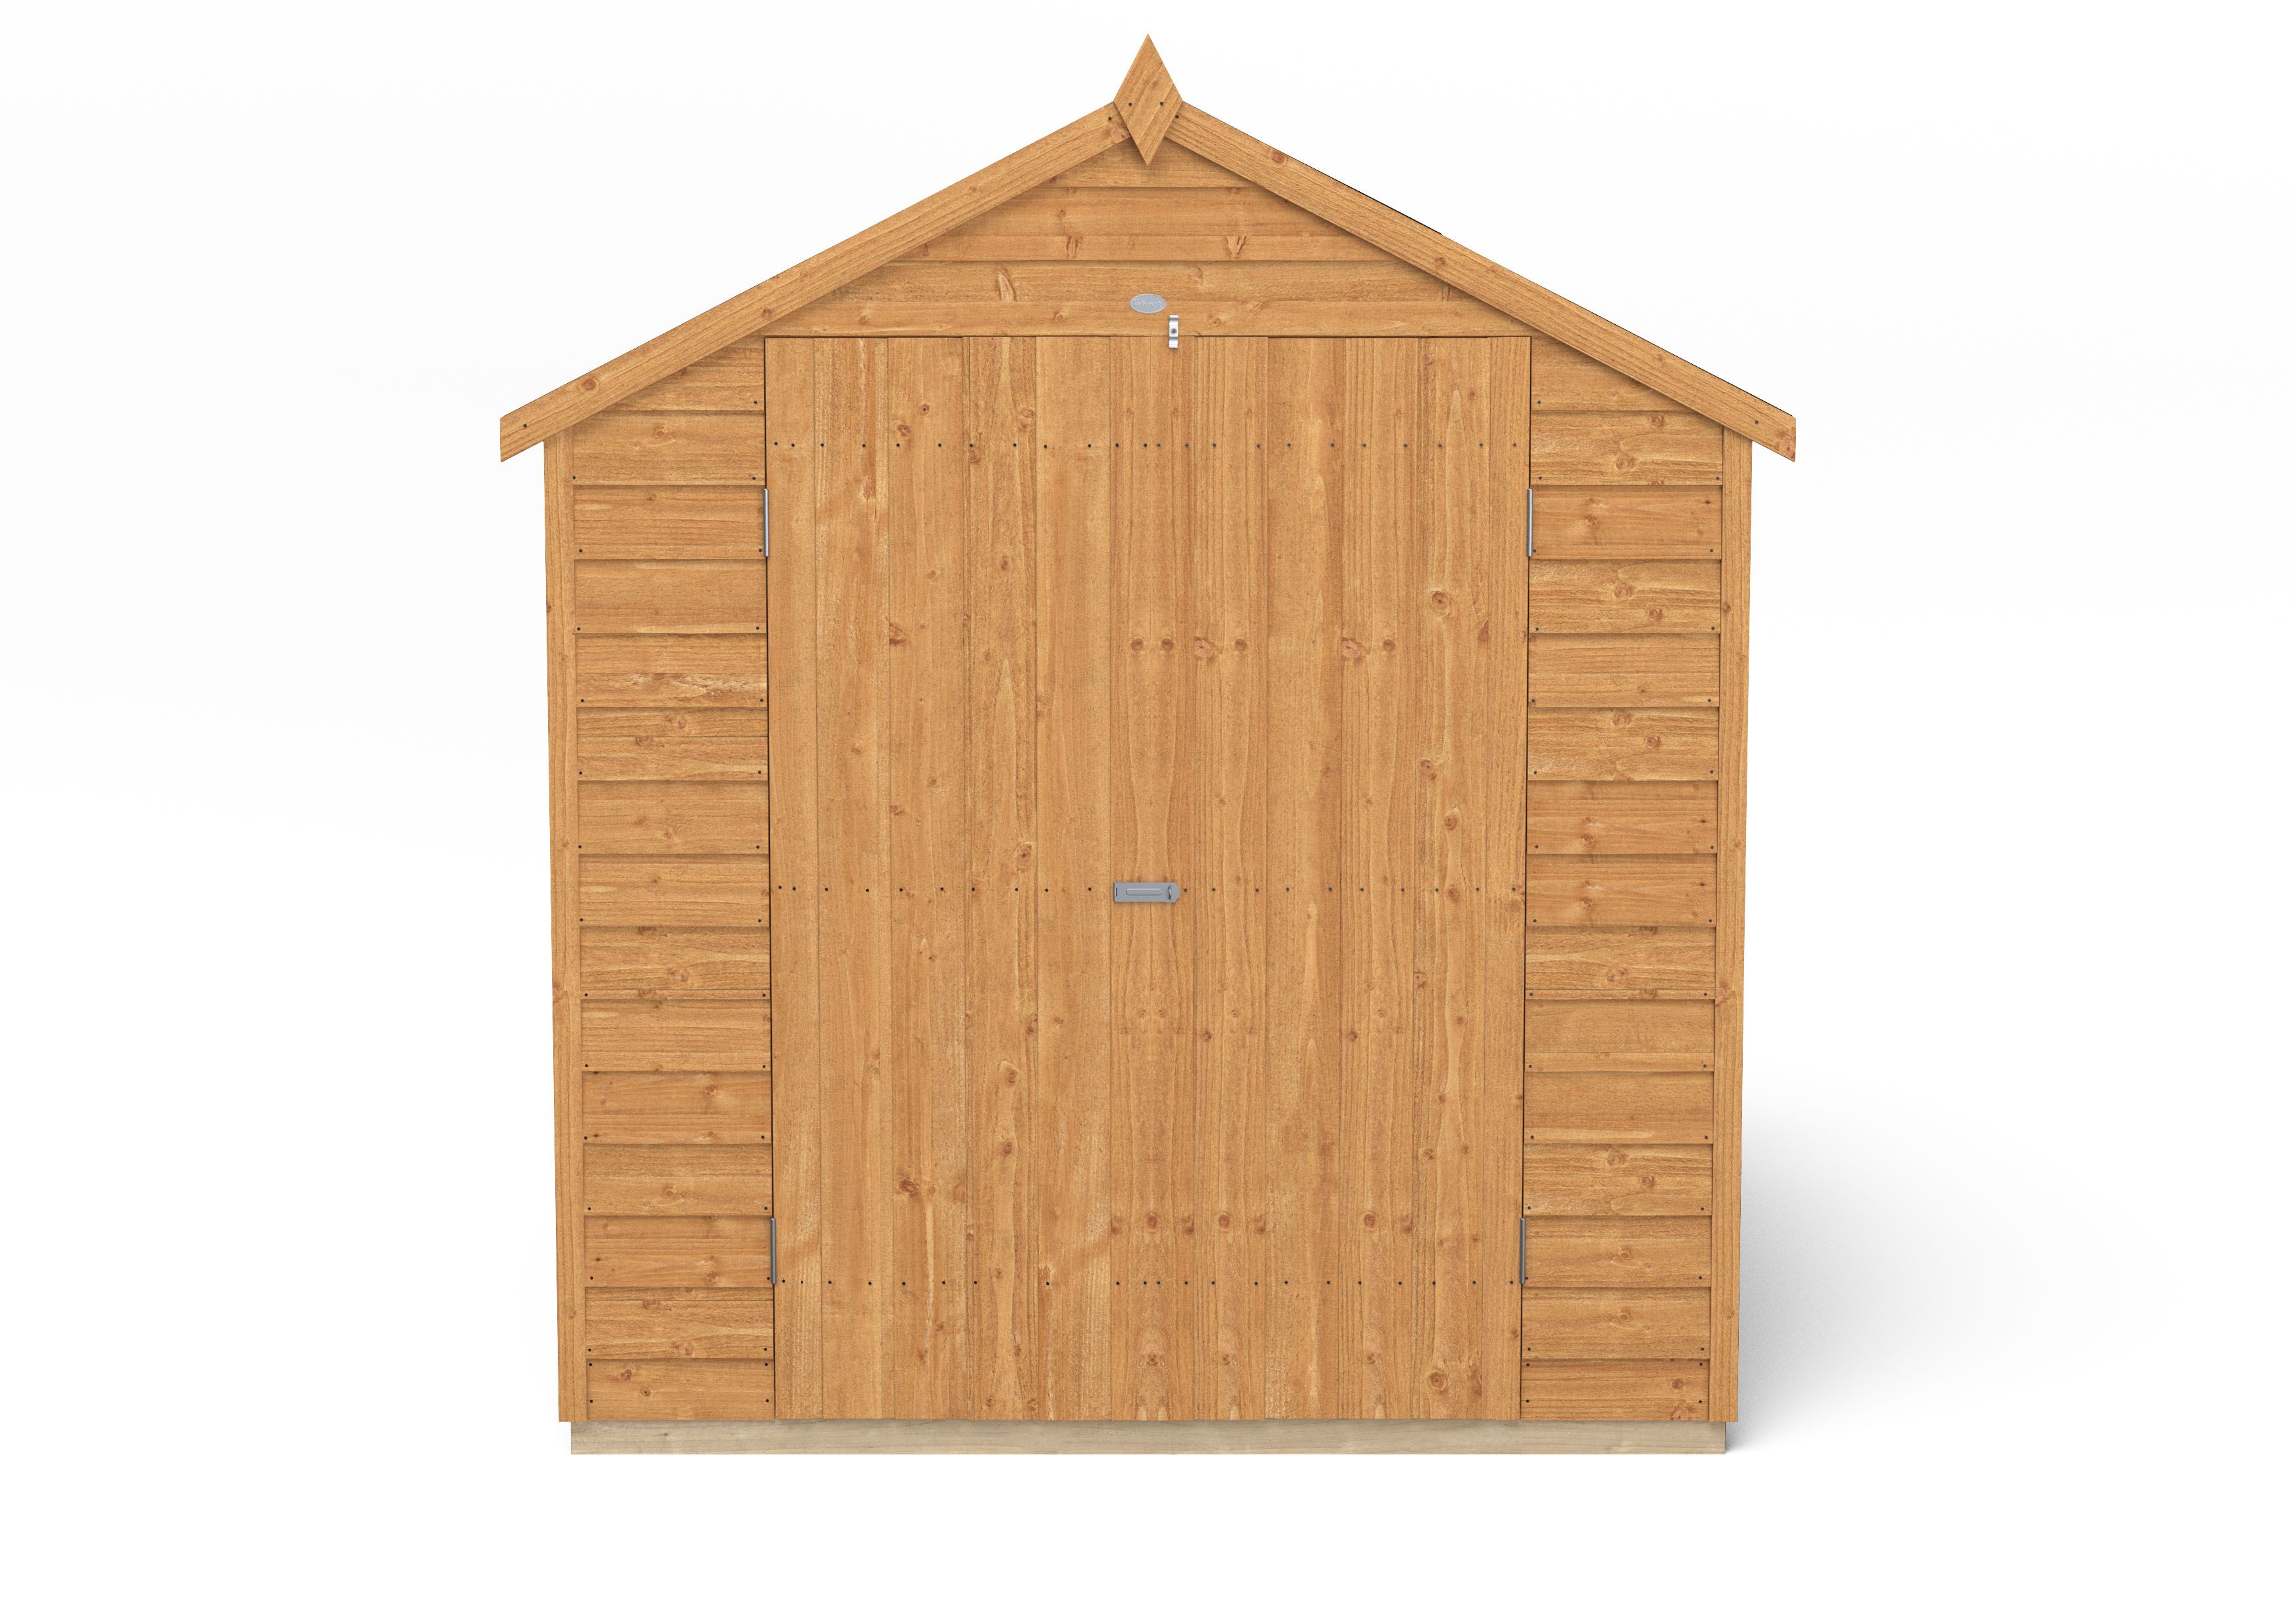 Forest Garden Overlap 8x6 ft Apex Wooden Dip treated 2 door Shed with floor & 2 windows (Base included) - Assembly service included